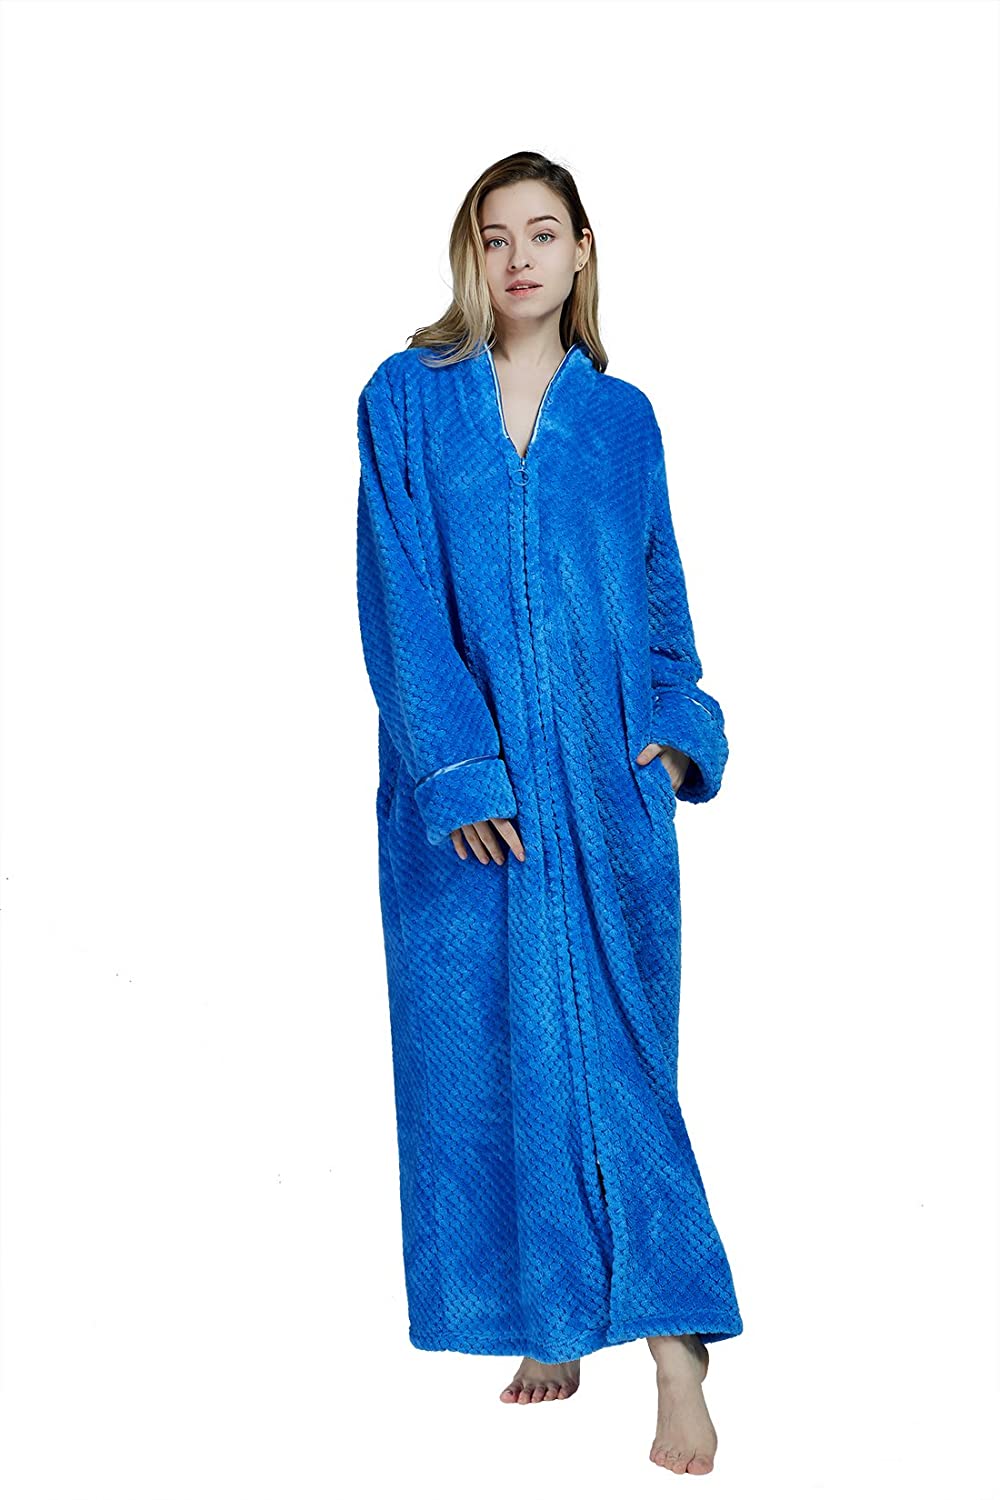 Price:$38.96 Flannel Long Sleeve Nightgowns Full Length Bathrobes Plush Fleece Long Robe for Women with Zipper (Blue, L) at Amazon Women’s Clothing store